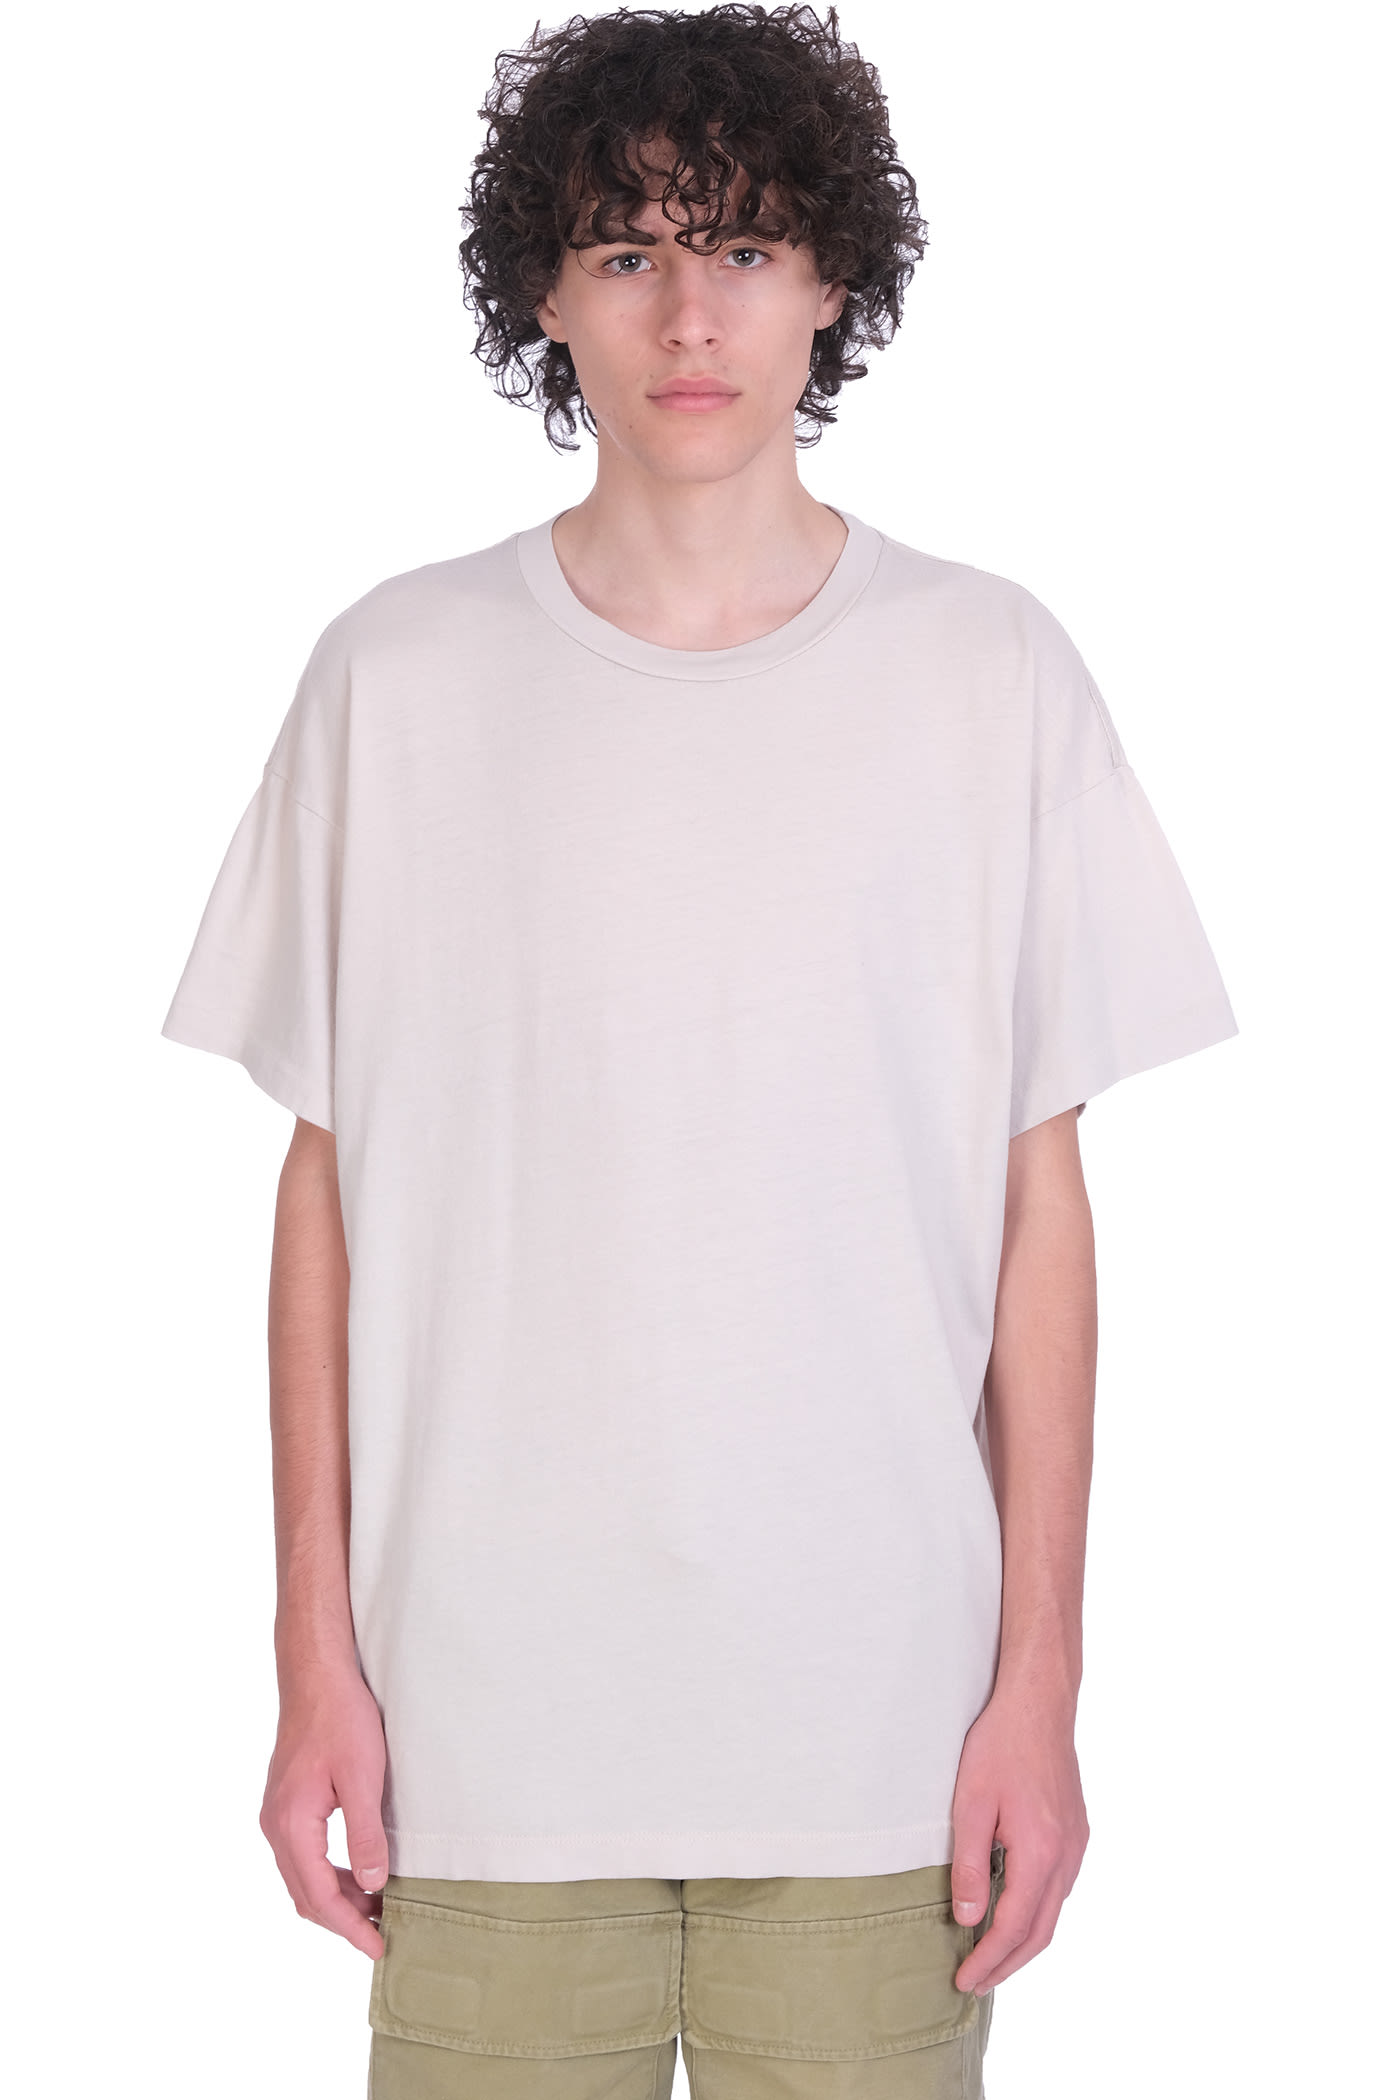 Fear of God T-shirt In Grey Cotton